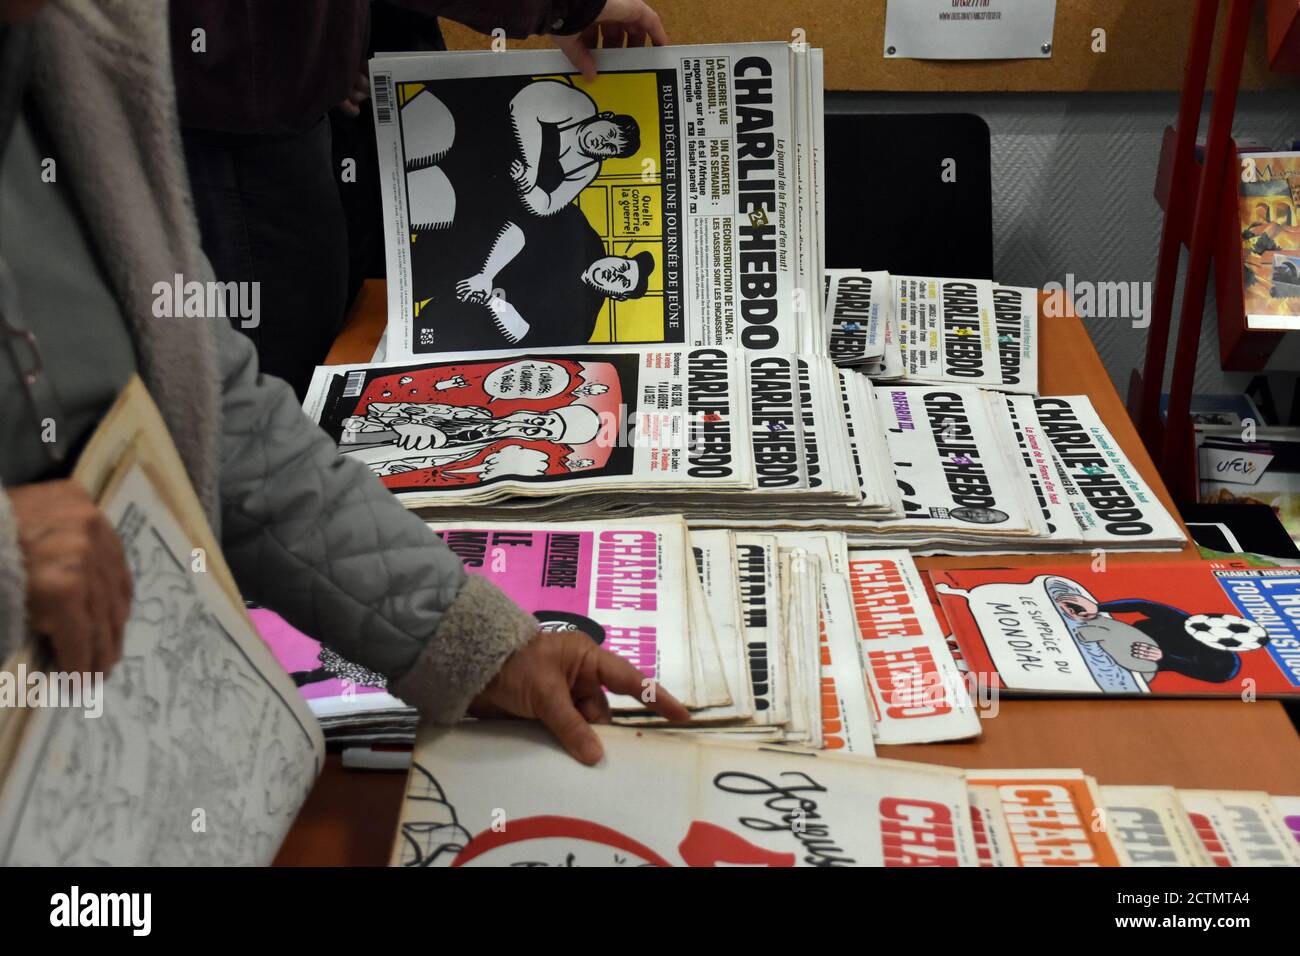 People are seen reading the old issues of the 'Charlie-Hebdo' newspapers displayed on a desk.Nearly a hundred media, newspapers, magazines, television channels and radio stations, call on the French to mobilize in favor of freedom of expression, in support of Charlie Hebdo, which has been the subject of new threats since the republication of Muhammad caricatures. The ongoing trial of the attack on the newspaper, which killed 12 on January 7, 2015, will be held until November 10, 2020. Stock Photo